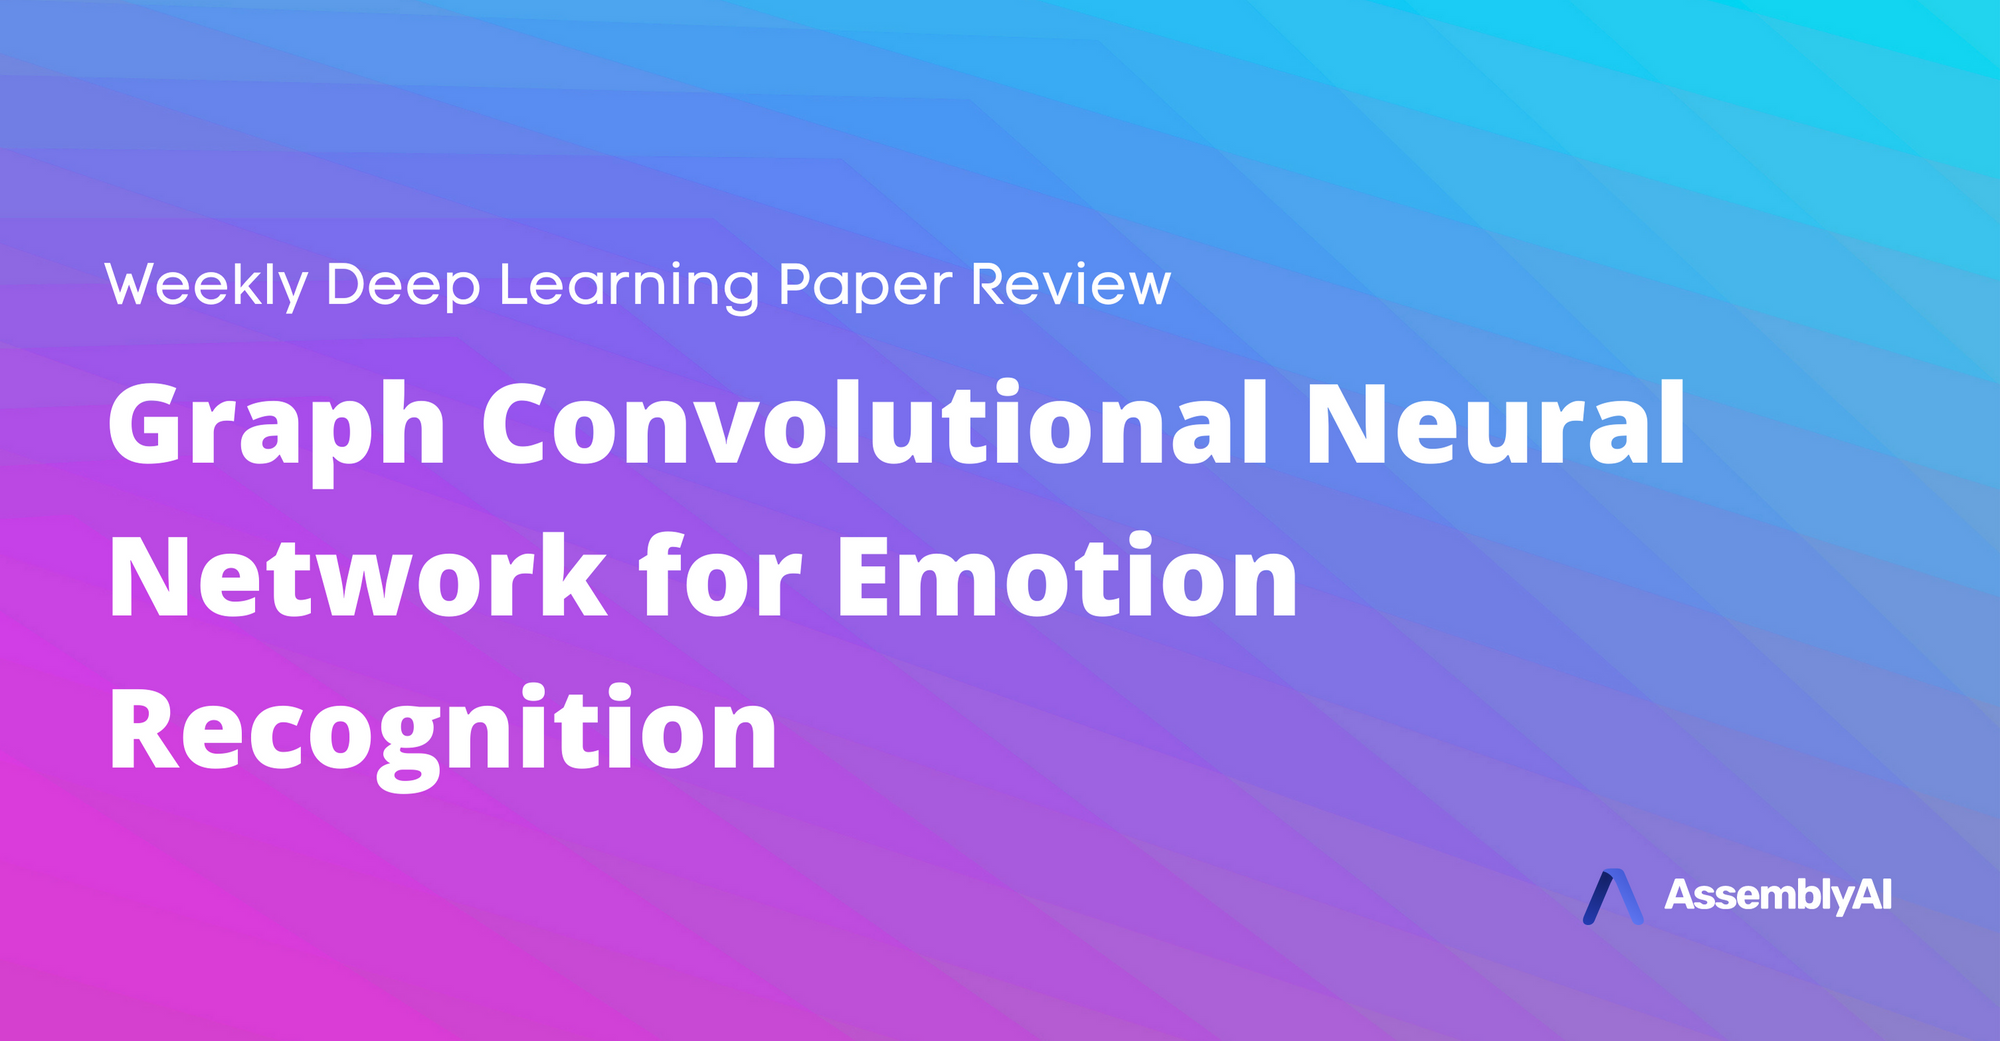 Review - A Graph Convolutional Neural Network for Emotion Recognition in Conversation